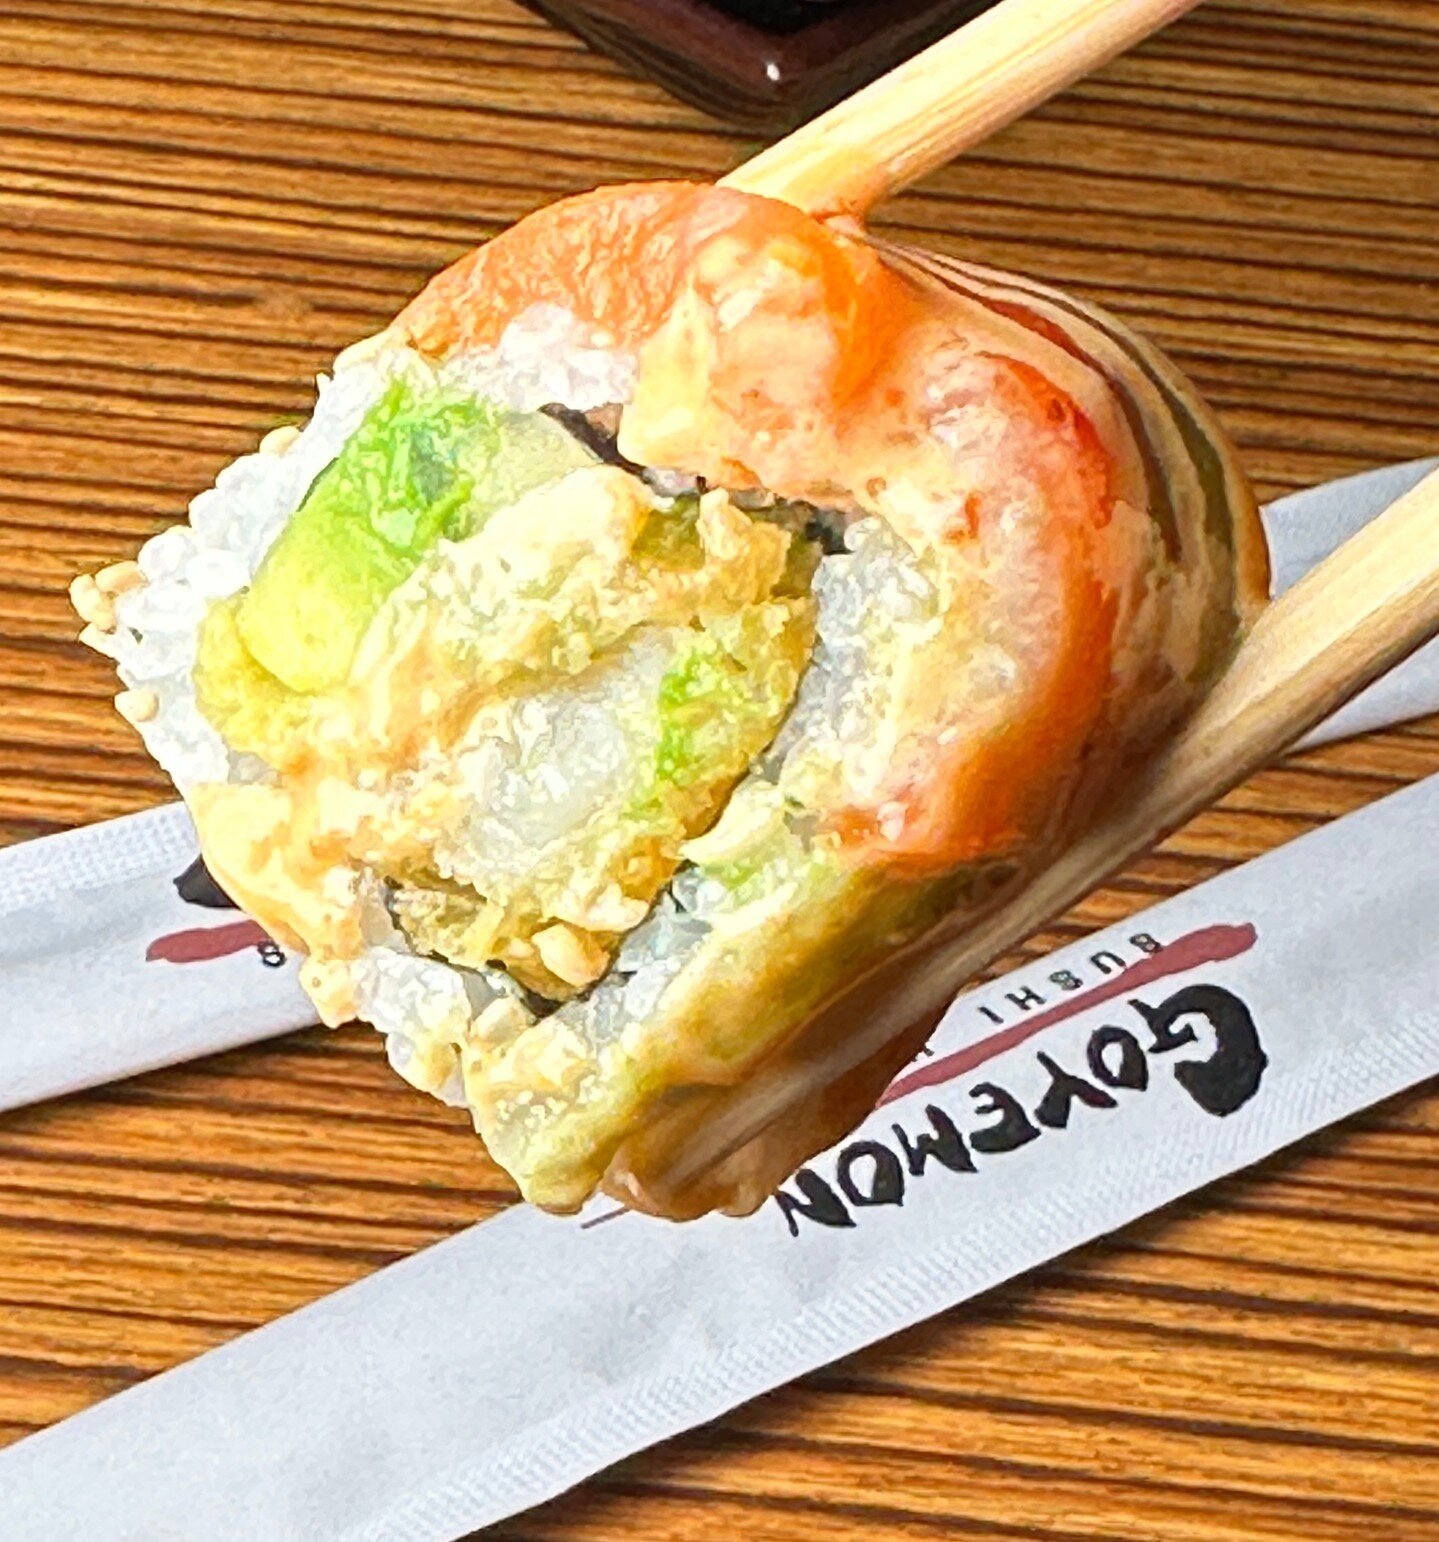 Let the magic of sushi goodness to make your day &ndash; a palette of flavors that brings joy to every bite! ITADAKIMASU #UmamiJourney 🍣✨ 

◾️◽️◾️◽️◾️◽️◾️◽️◾️◽️ 
🍣 𝗔𝗬𝗖𝗘 𝗦𝗨𝗦𝗛𝗜 𝗛𝗢𝗨𝗦𝗘 𝗚𝗢𝗬𝗘𝗠𝗢𝗡 
⏰ ᴅᴀɪʟʏ: 12:00 ᴘᴍ - 11:00 ᴘᴍ 
⏰ ʟᴀꜱᴛ 